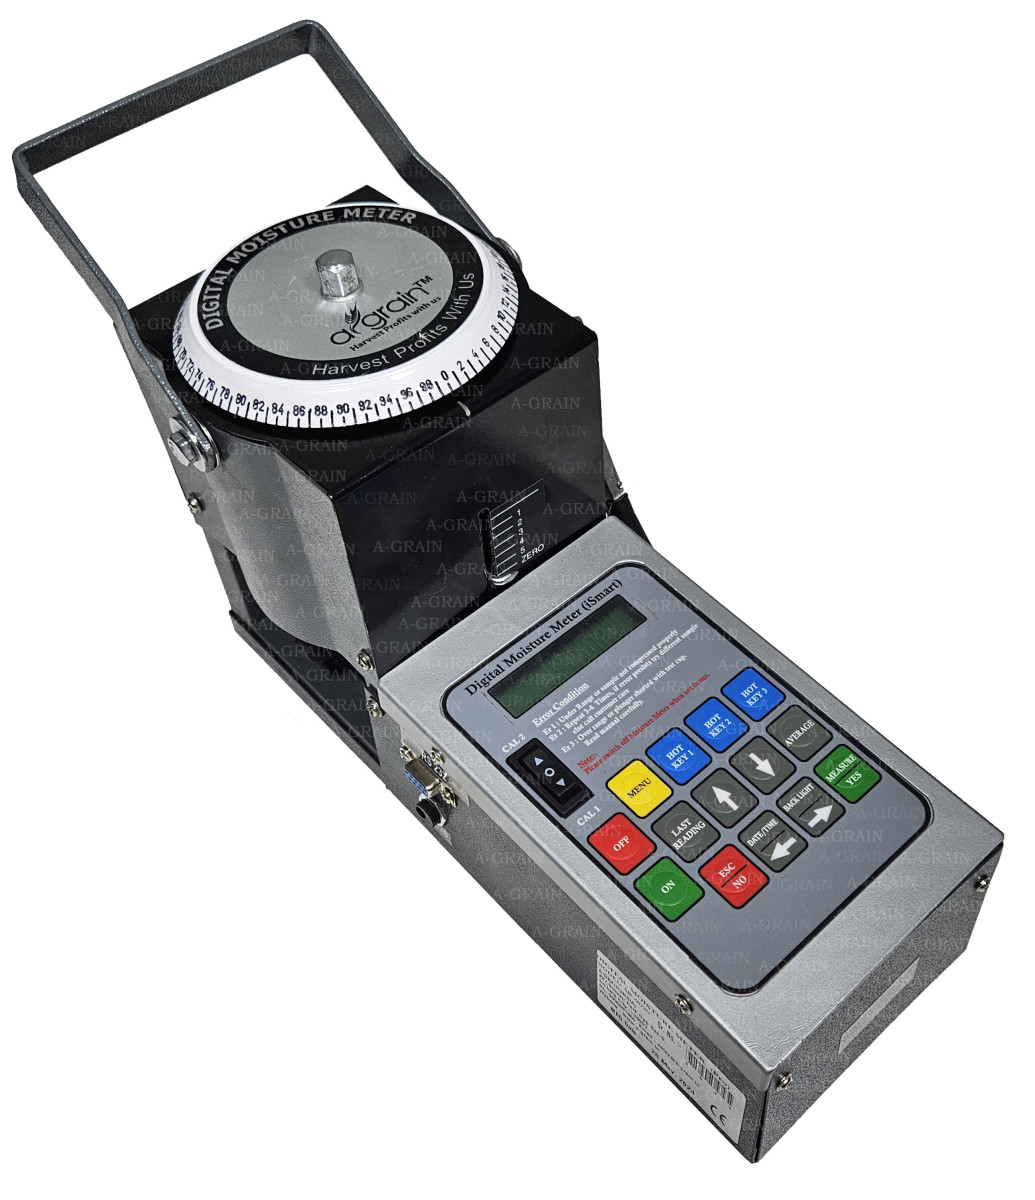 An image of the AGRAIN Agro Digital Moisture Meter (AB-3020), a specialized device designed for accurate moisture measurement in agricultural products. The meter features a digital display and control interface, highlighting its user-friendly design and advanced functionality.